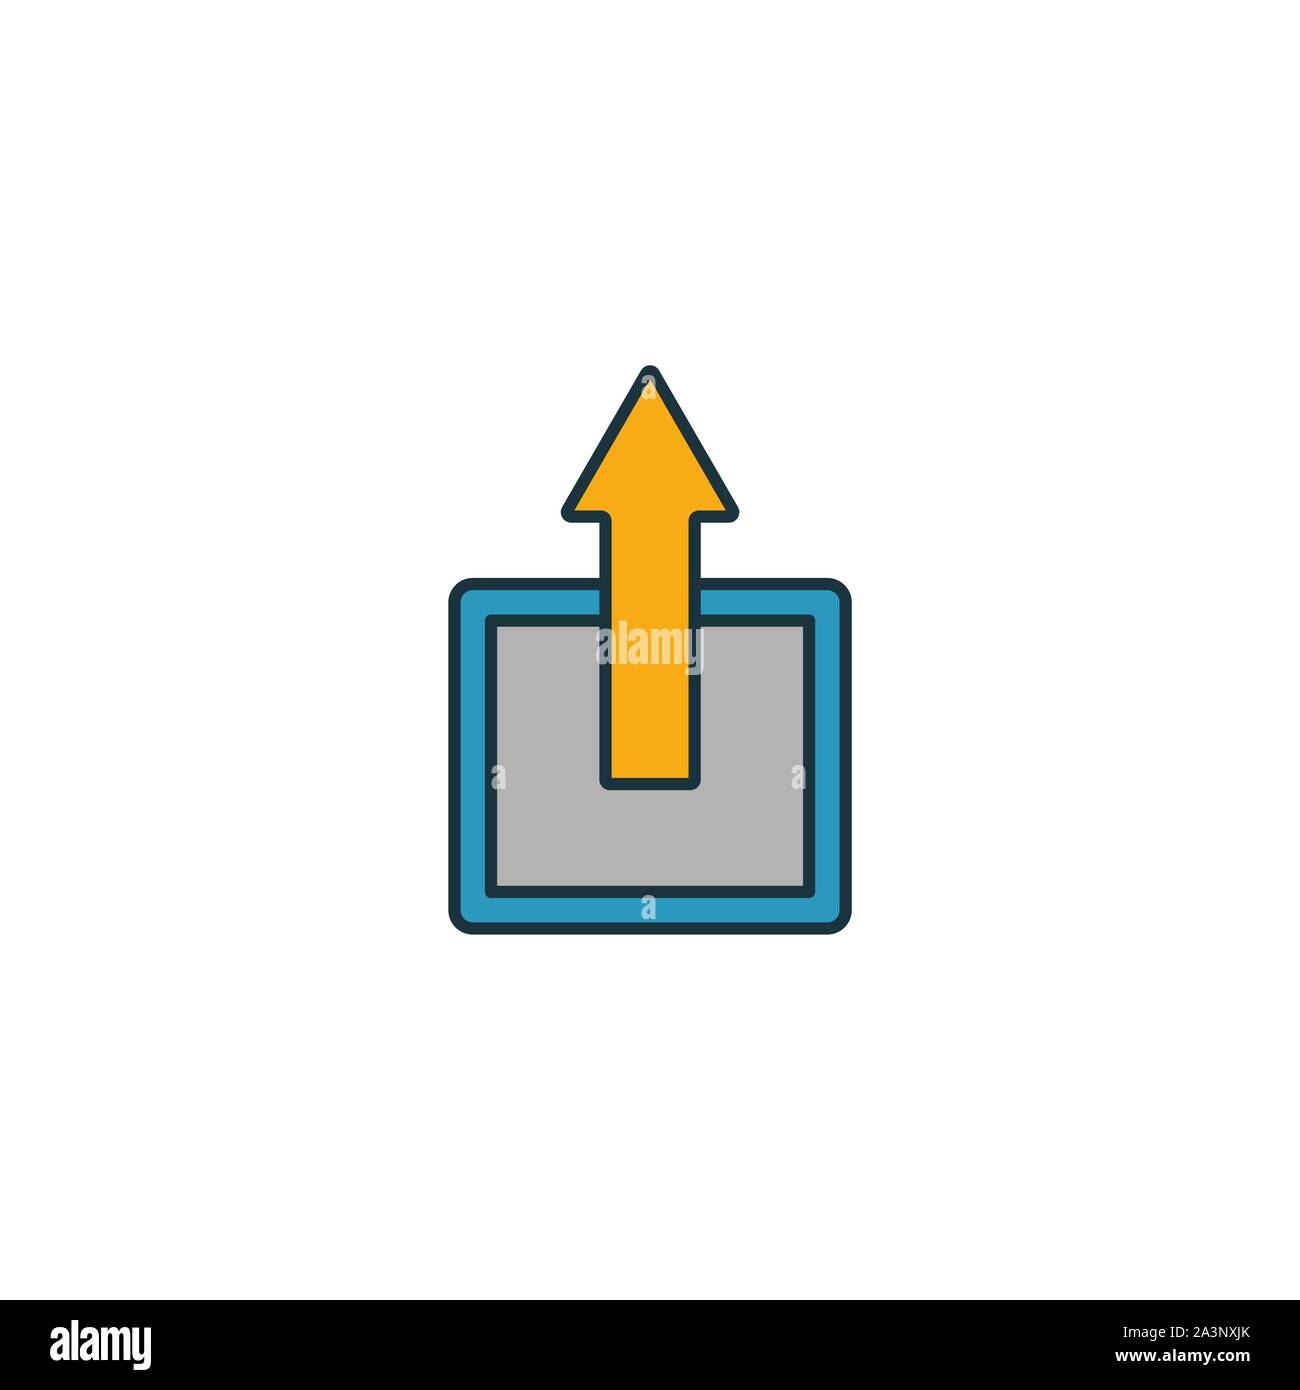 Profitability icon. Outline filled creative elemet from business ethics icons collection. Premium profitability icon for ui, ux, apps, software and Stock Vector